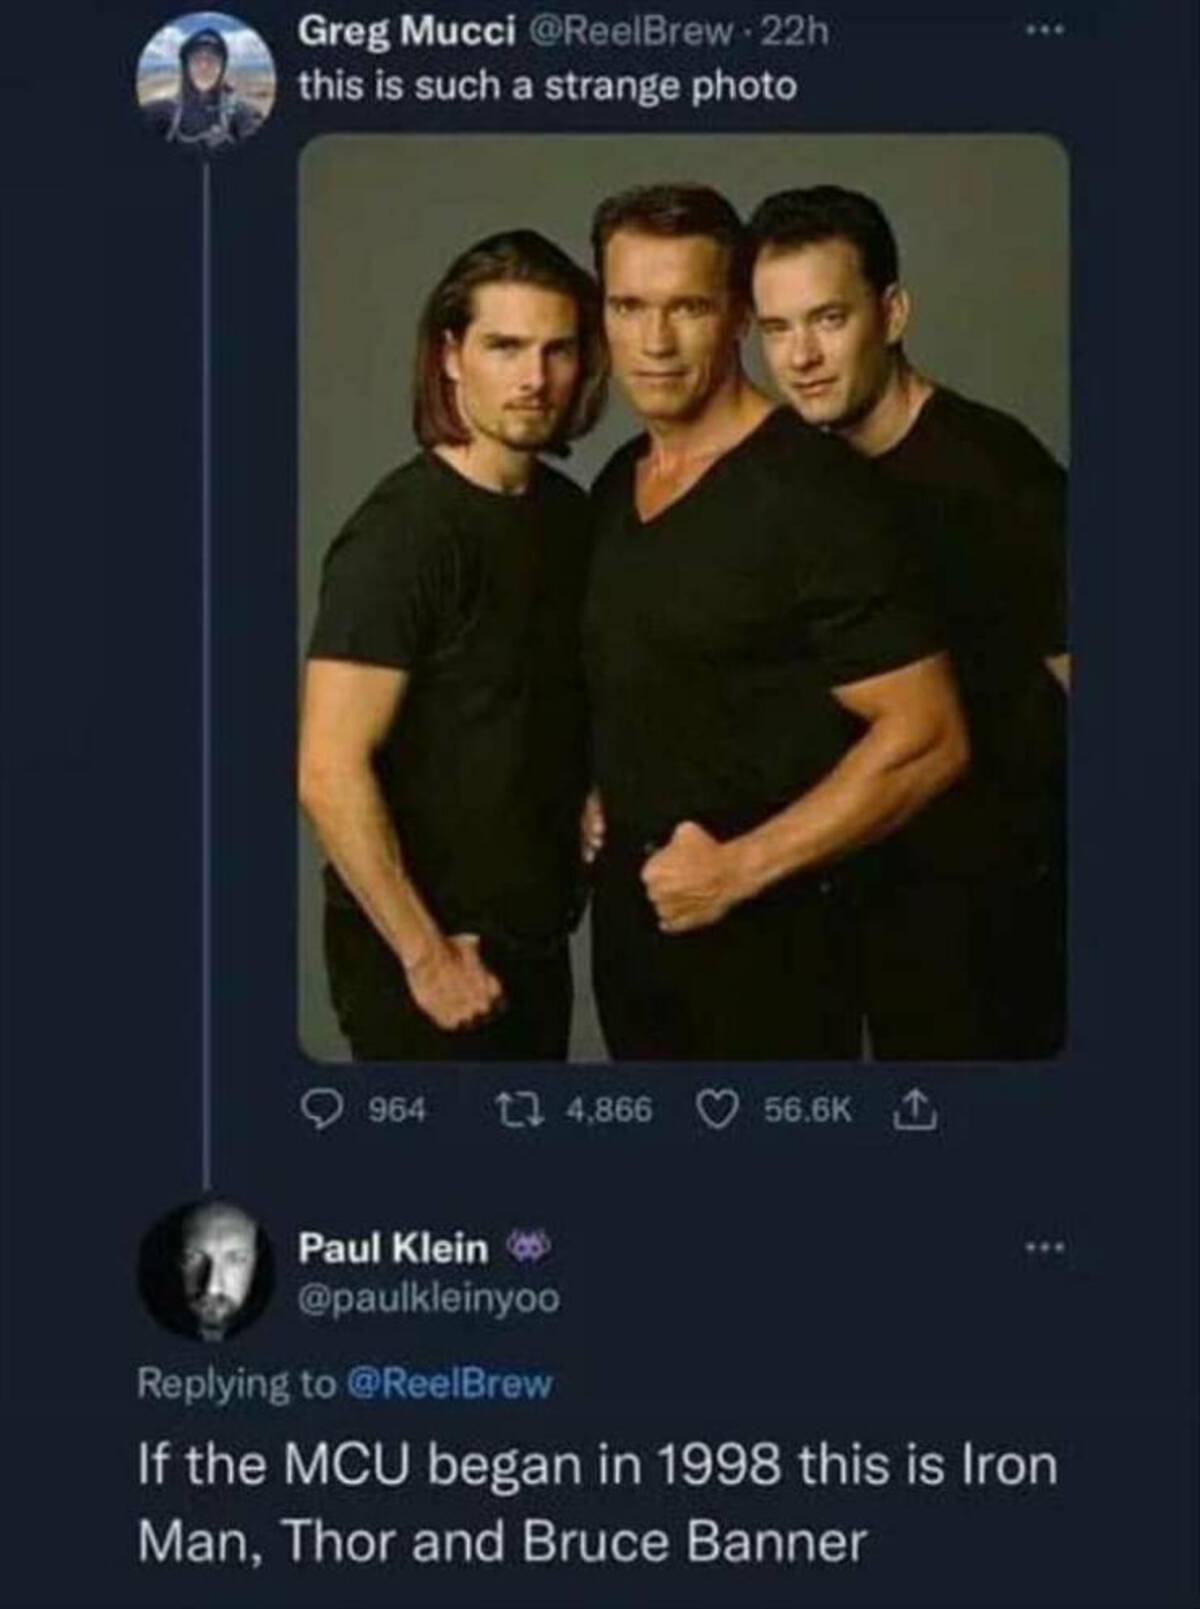 tom cruise arnold schwarzenegger tom hanks - Greg Mucci this is such a strange photo 964 14,866 1 Paul Klein If the Mcu began in 1998 this is Iron Man, Thor and Bruce Banner